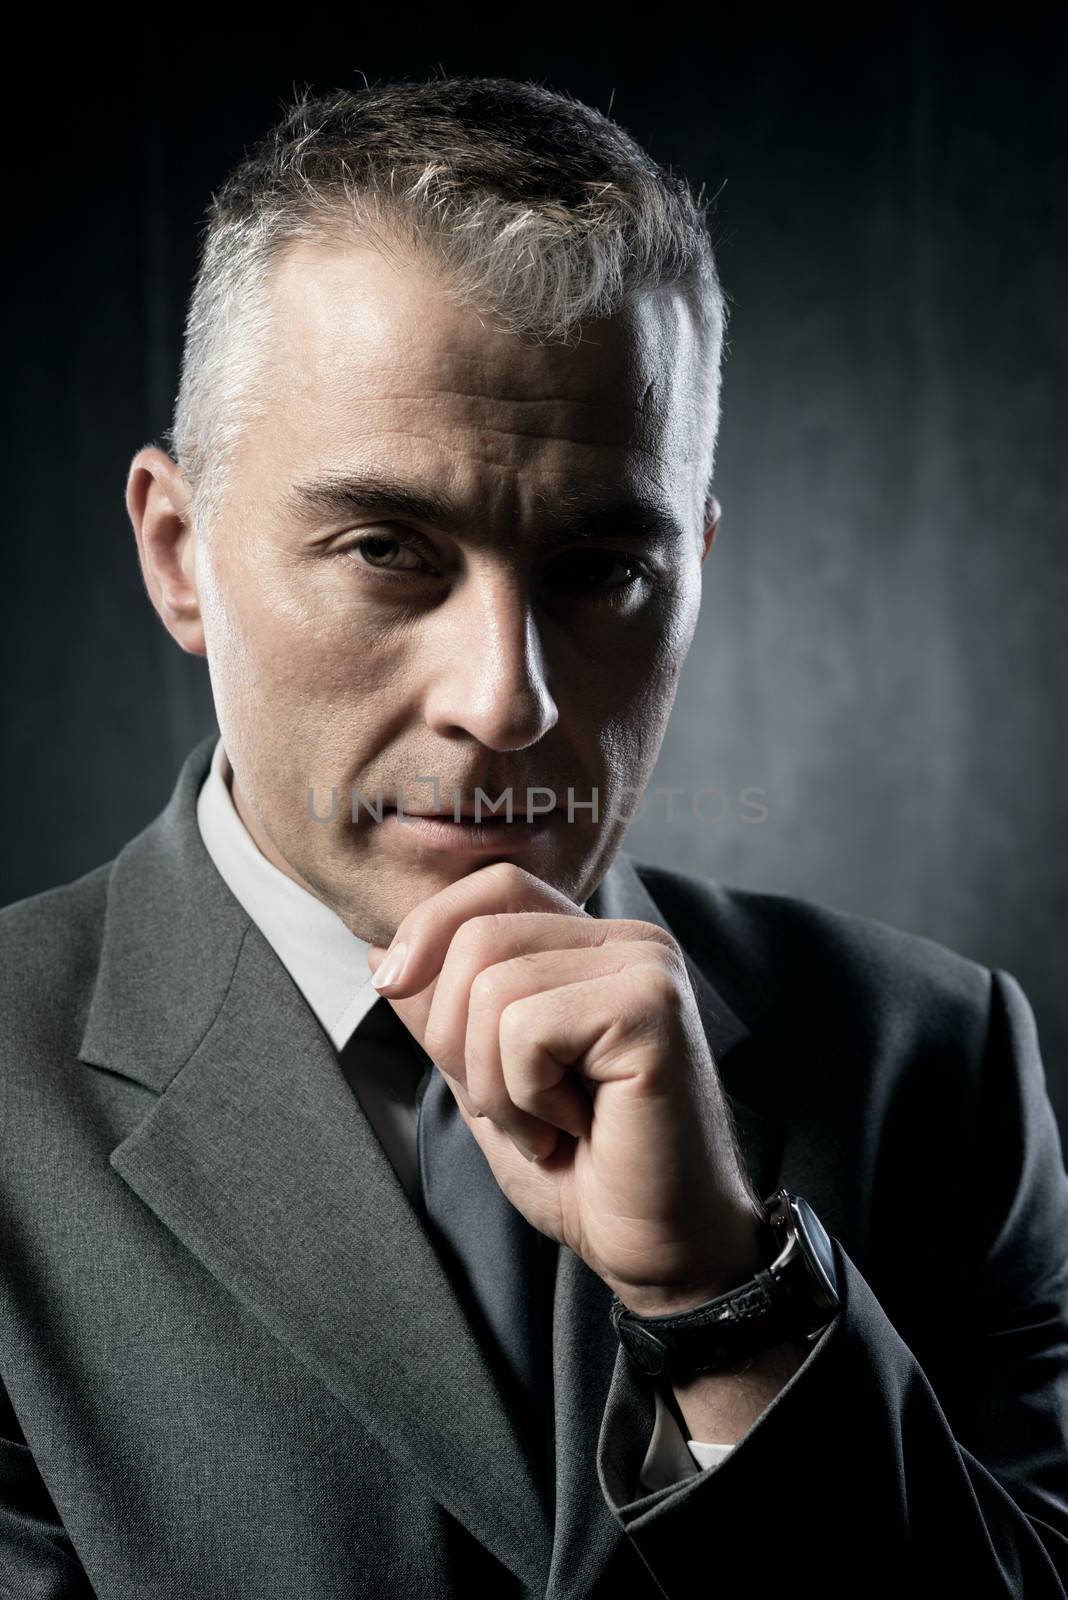 Pensive businessman with hand on chin on dark background.